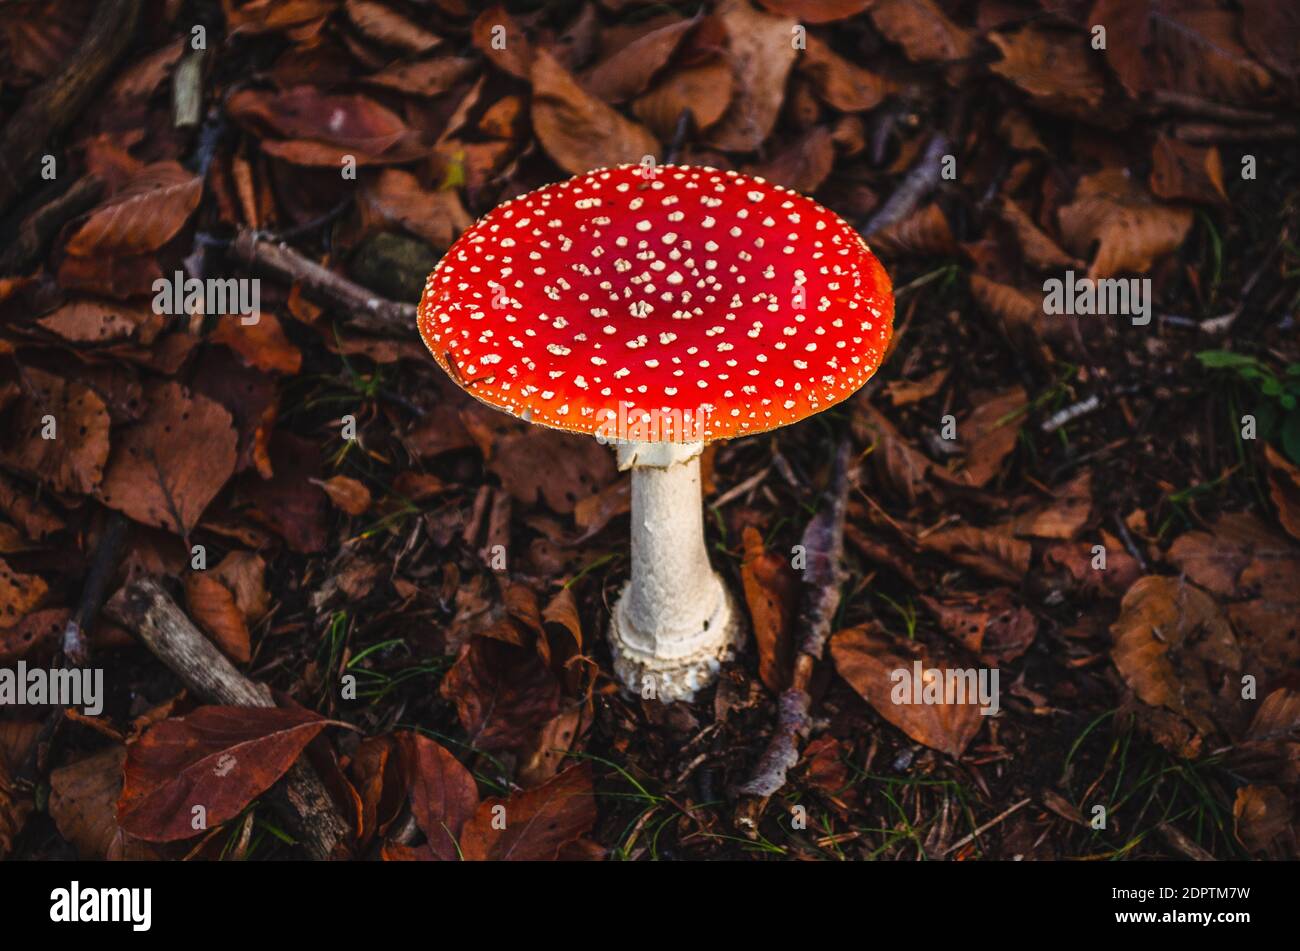 One Single Iconic Red And White Spotted Mushroom Isolated In Natural Environment Stock Photo